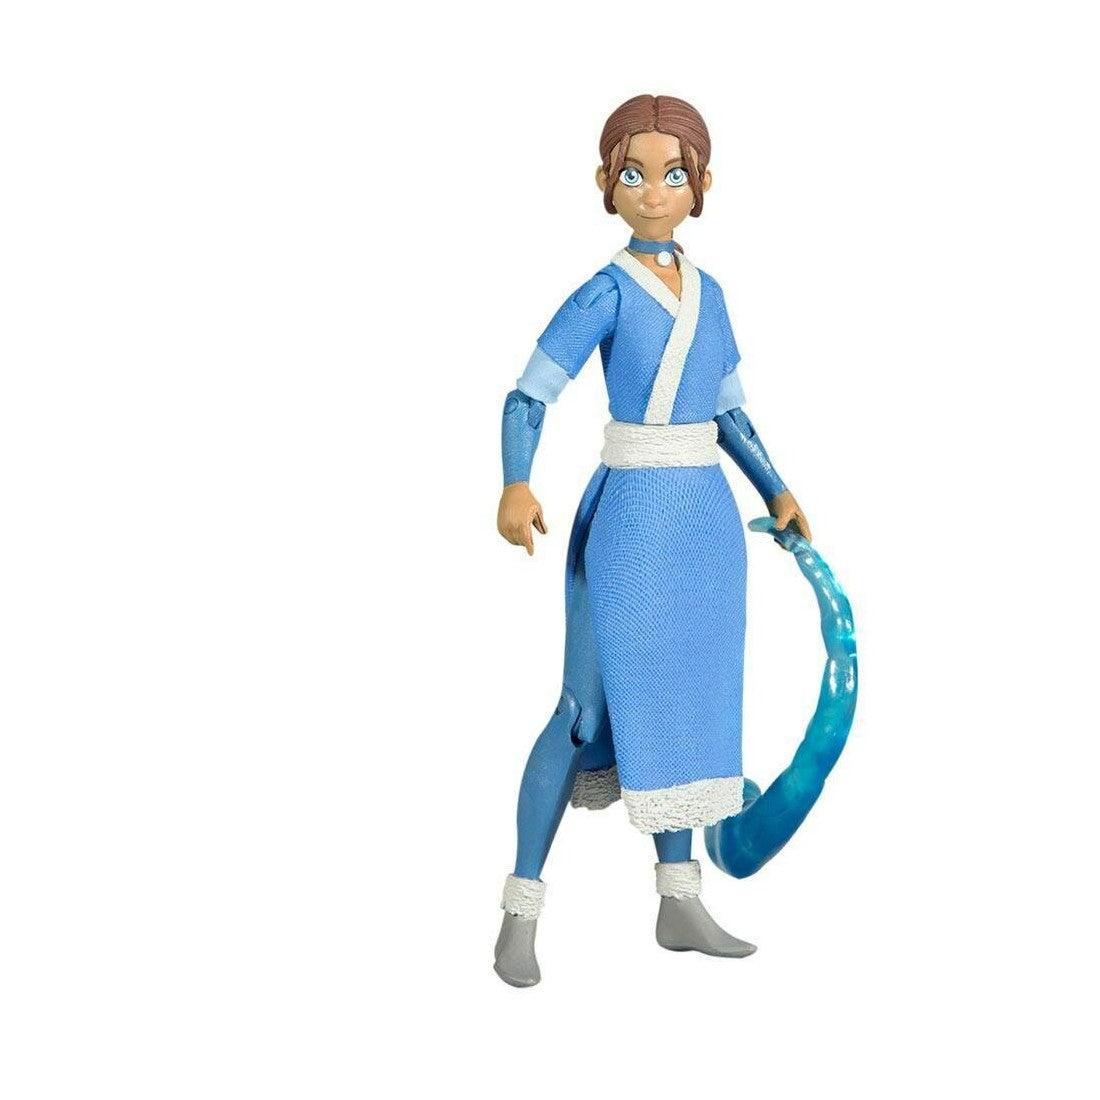 ACTION FIGURE KATARA WITH WATER 13 CM - AVATAR THE LAST AIRBENDER - Magic Dreams Store